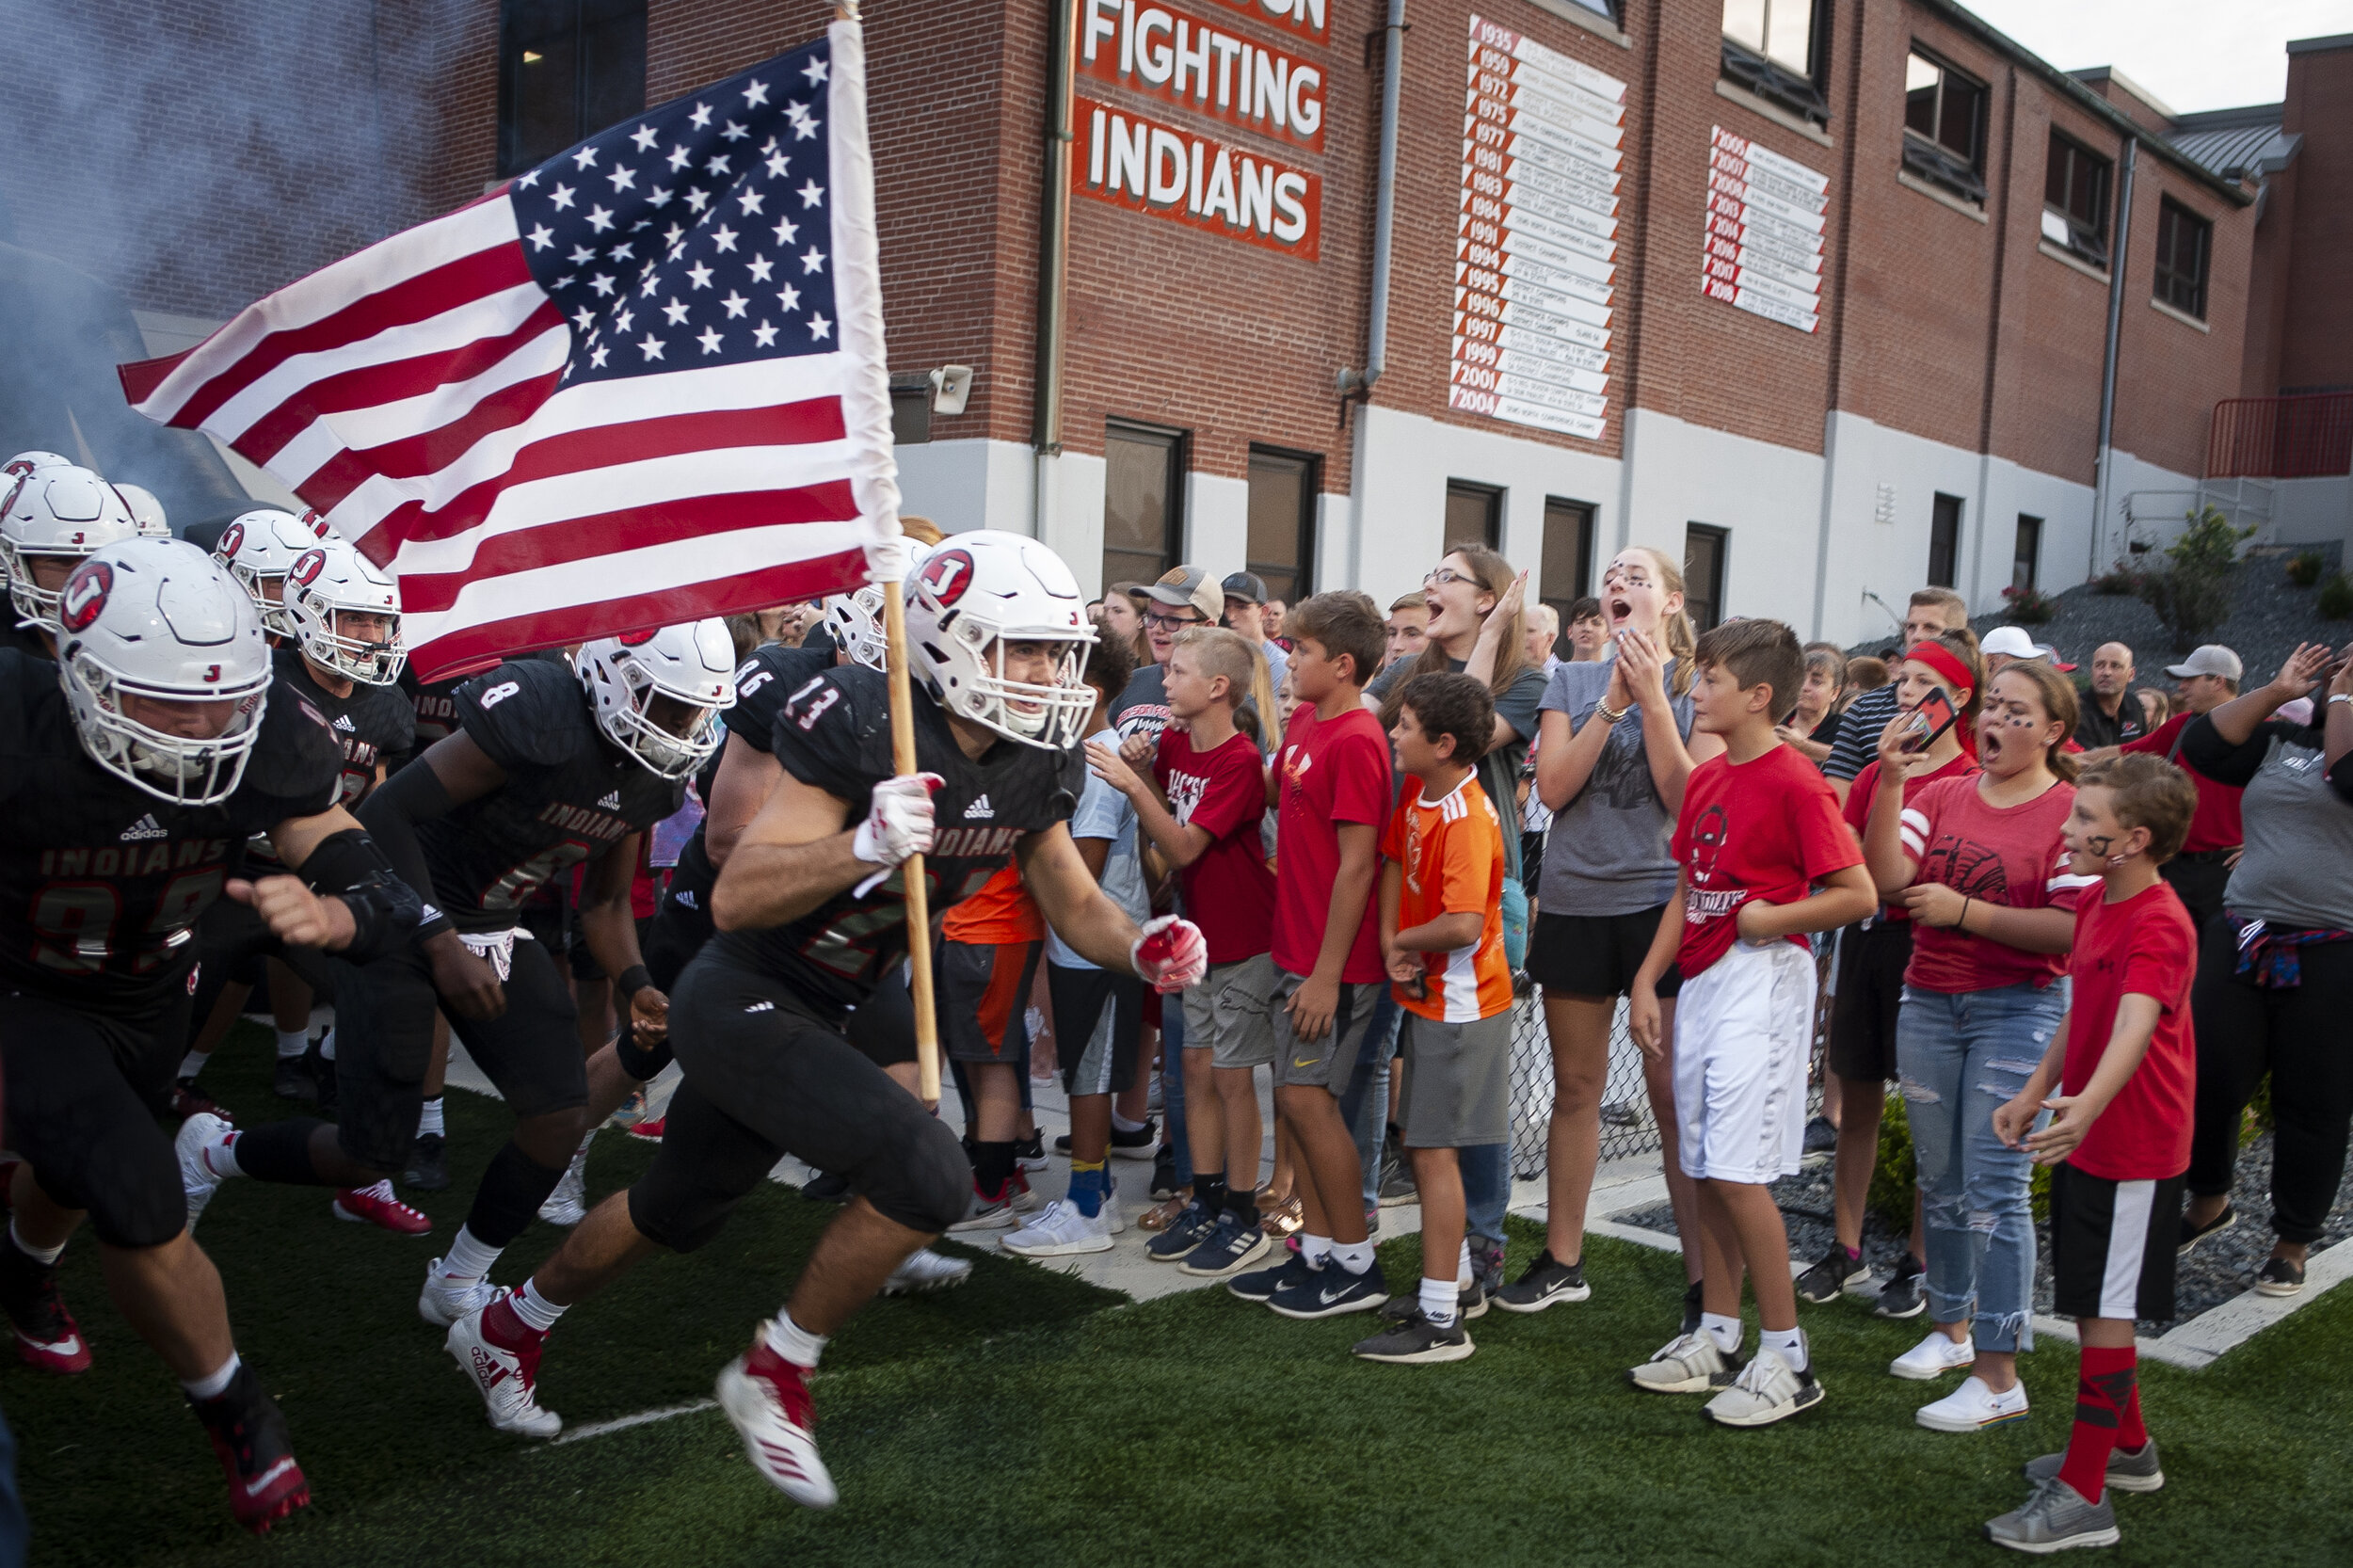  Jackson senior Luke Starzinger (23), with flag, and teammates take the field before the start of the team's 48-0 win against Webster Groves on Friday, Aug. 30, 2019, in Jackson.  